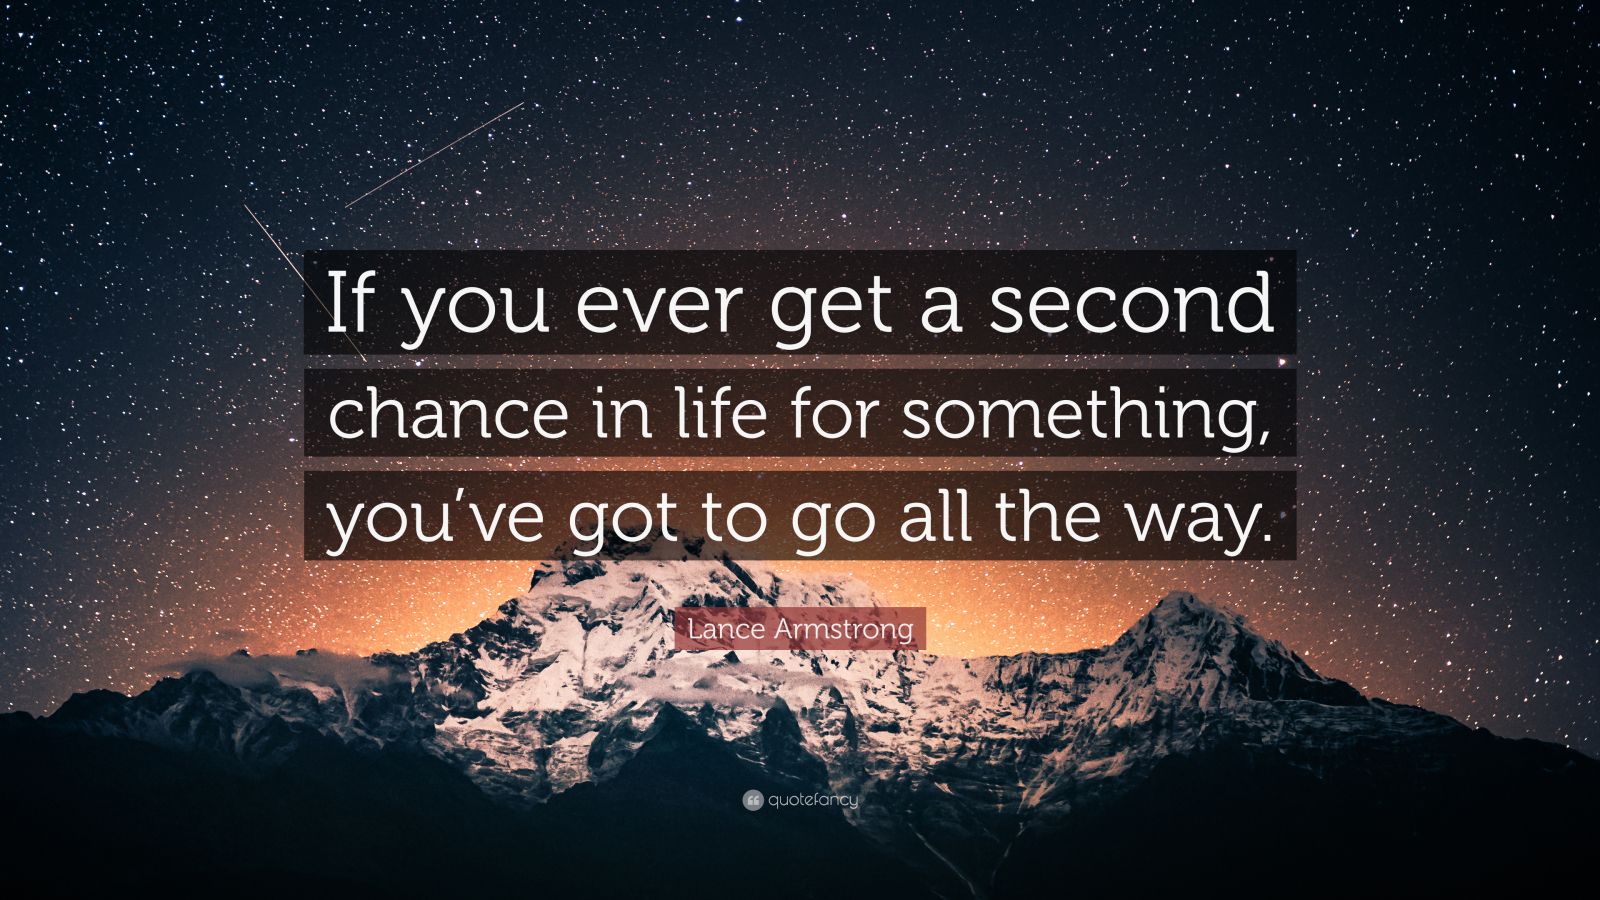 Lance Armstrong Quote: “If you ever get a second chance in life for ...